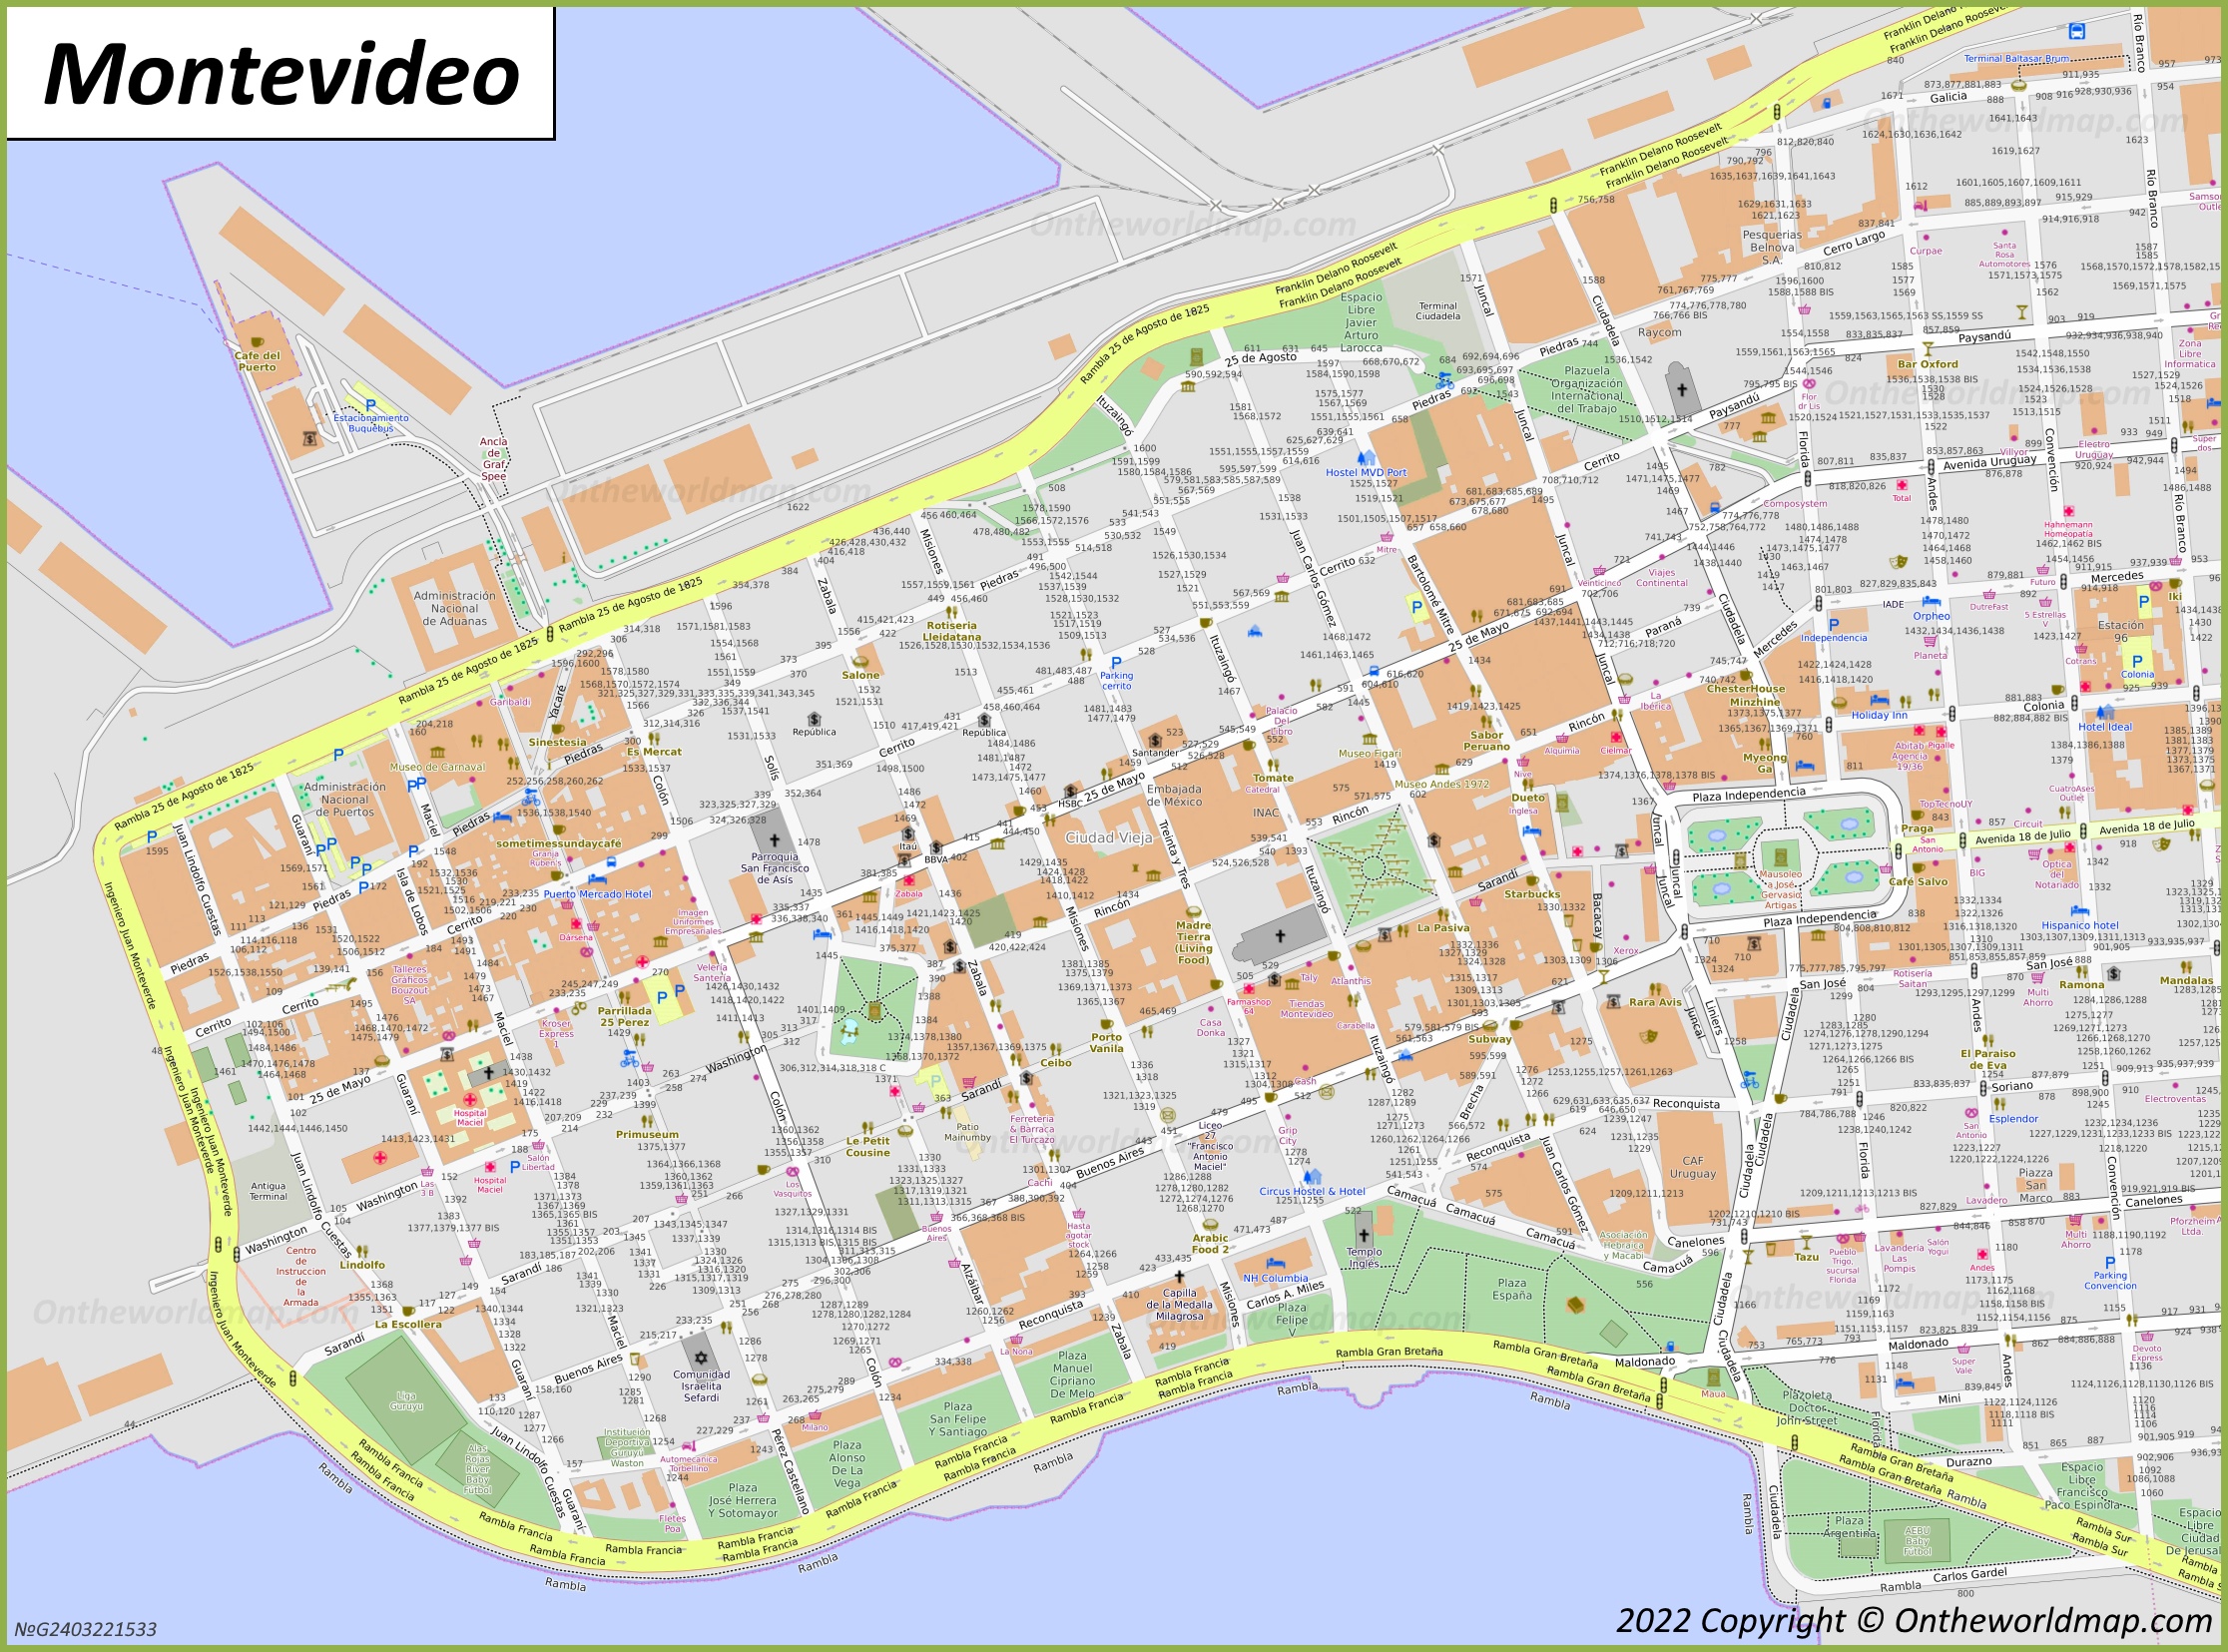 Montevideo Old Town Map